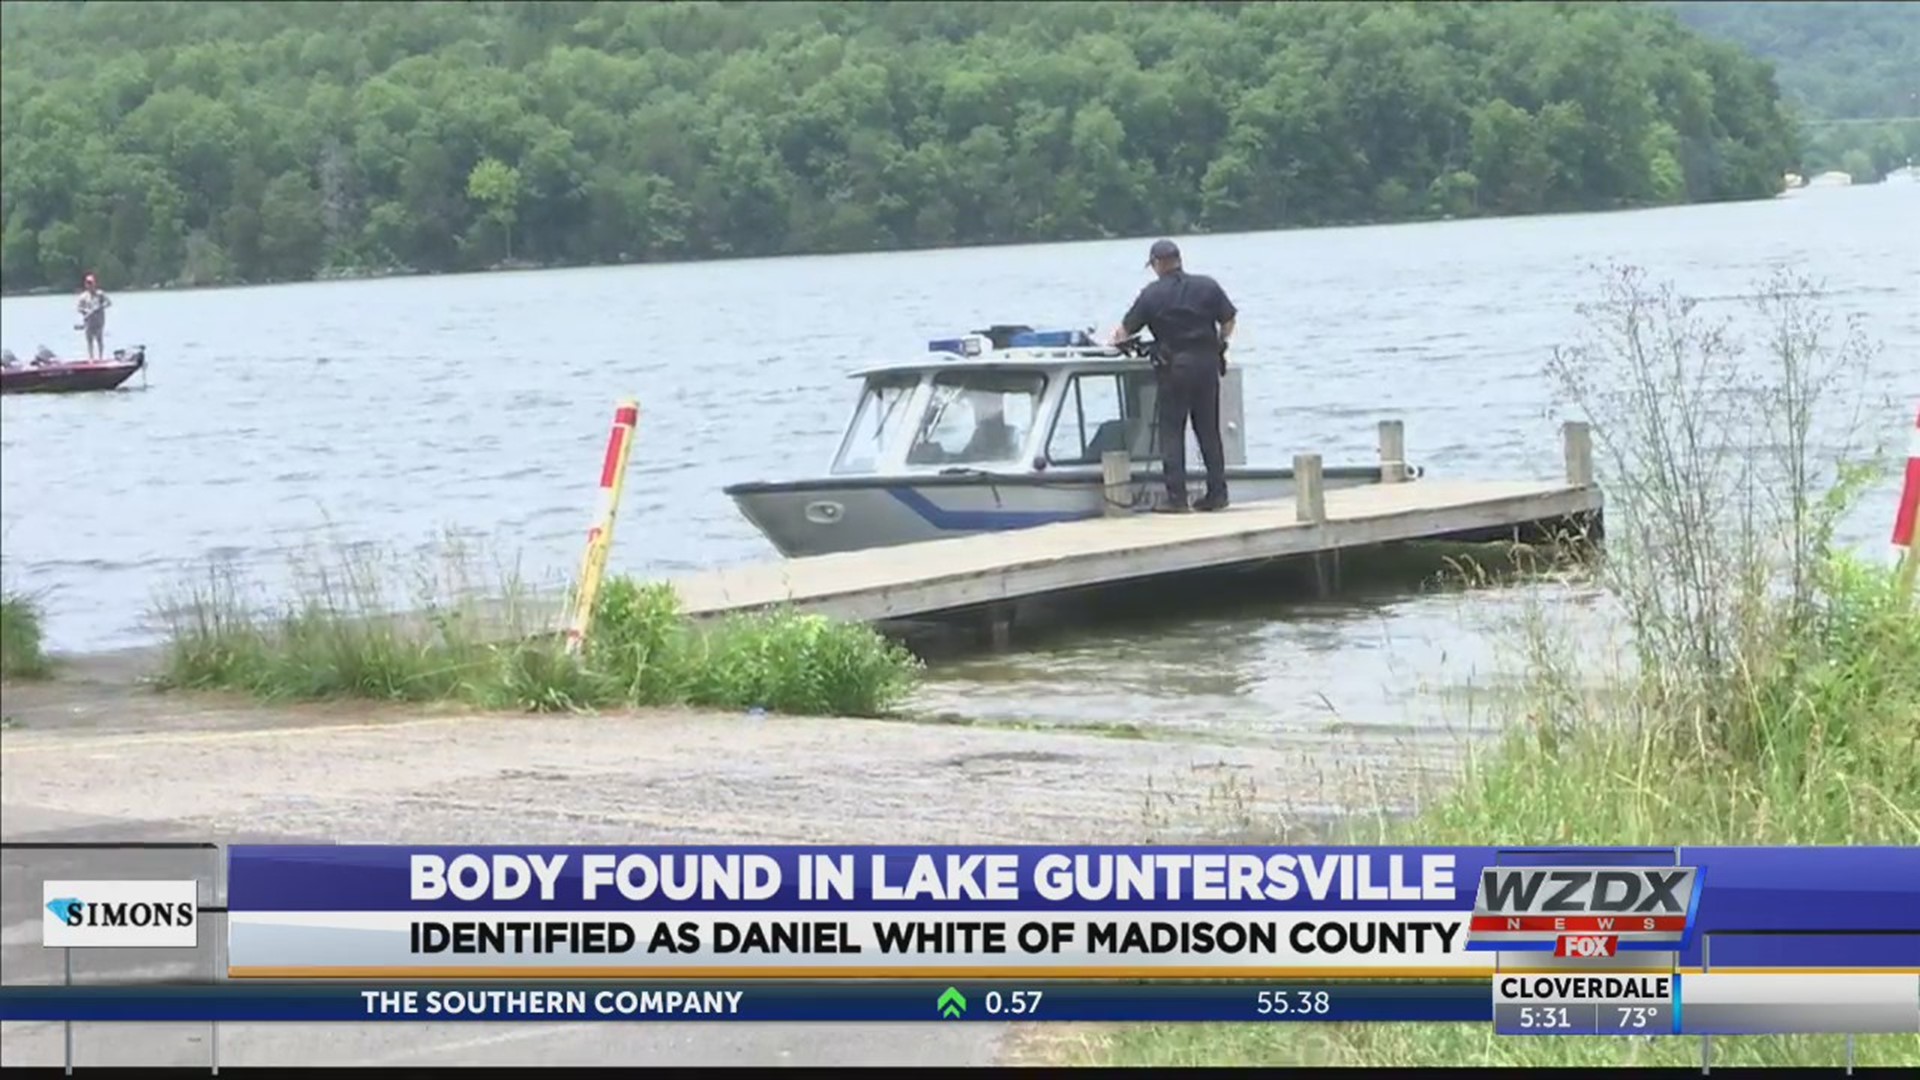 The body of Daniel White was found by a fisherman in the water of Lake Guntersville near Grant Sunday, June 2.